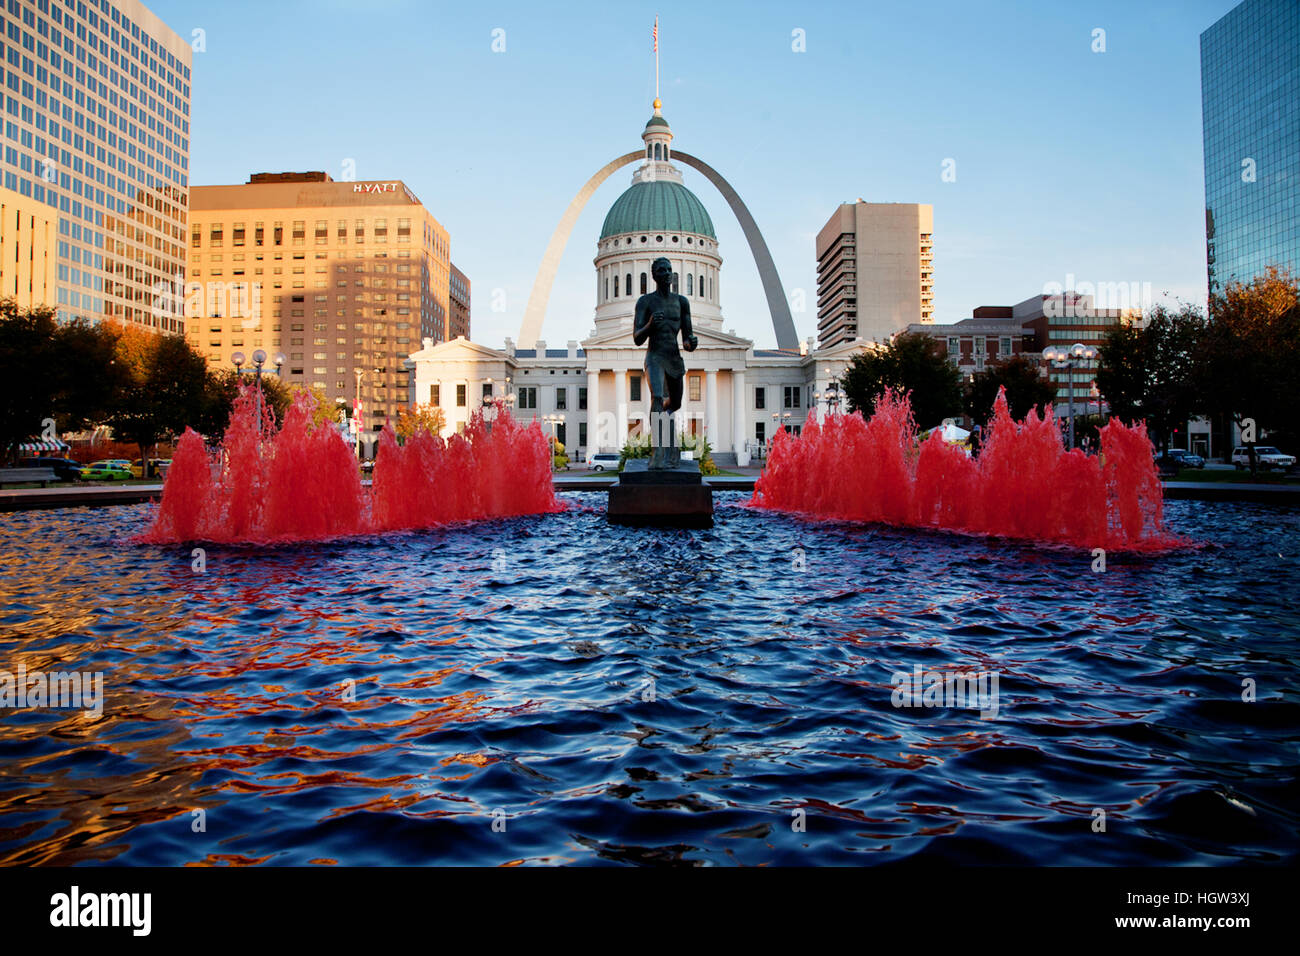 The Historic Old Courthouse, Site Of The Dred Scott Decision, In Downtown St. Louis, Mo. Has Fountains Running Red During The 2011 World Series For The St. Louis Cardinals Baseball Team Stock Photo